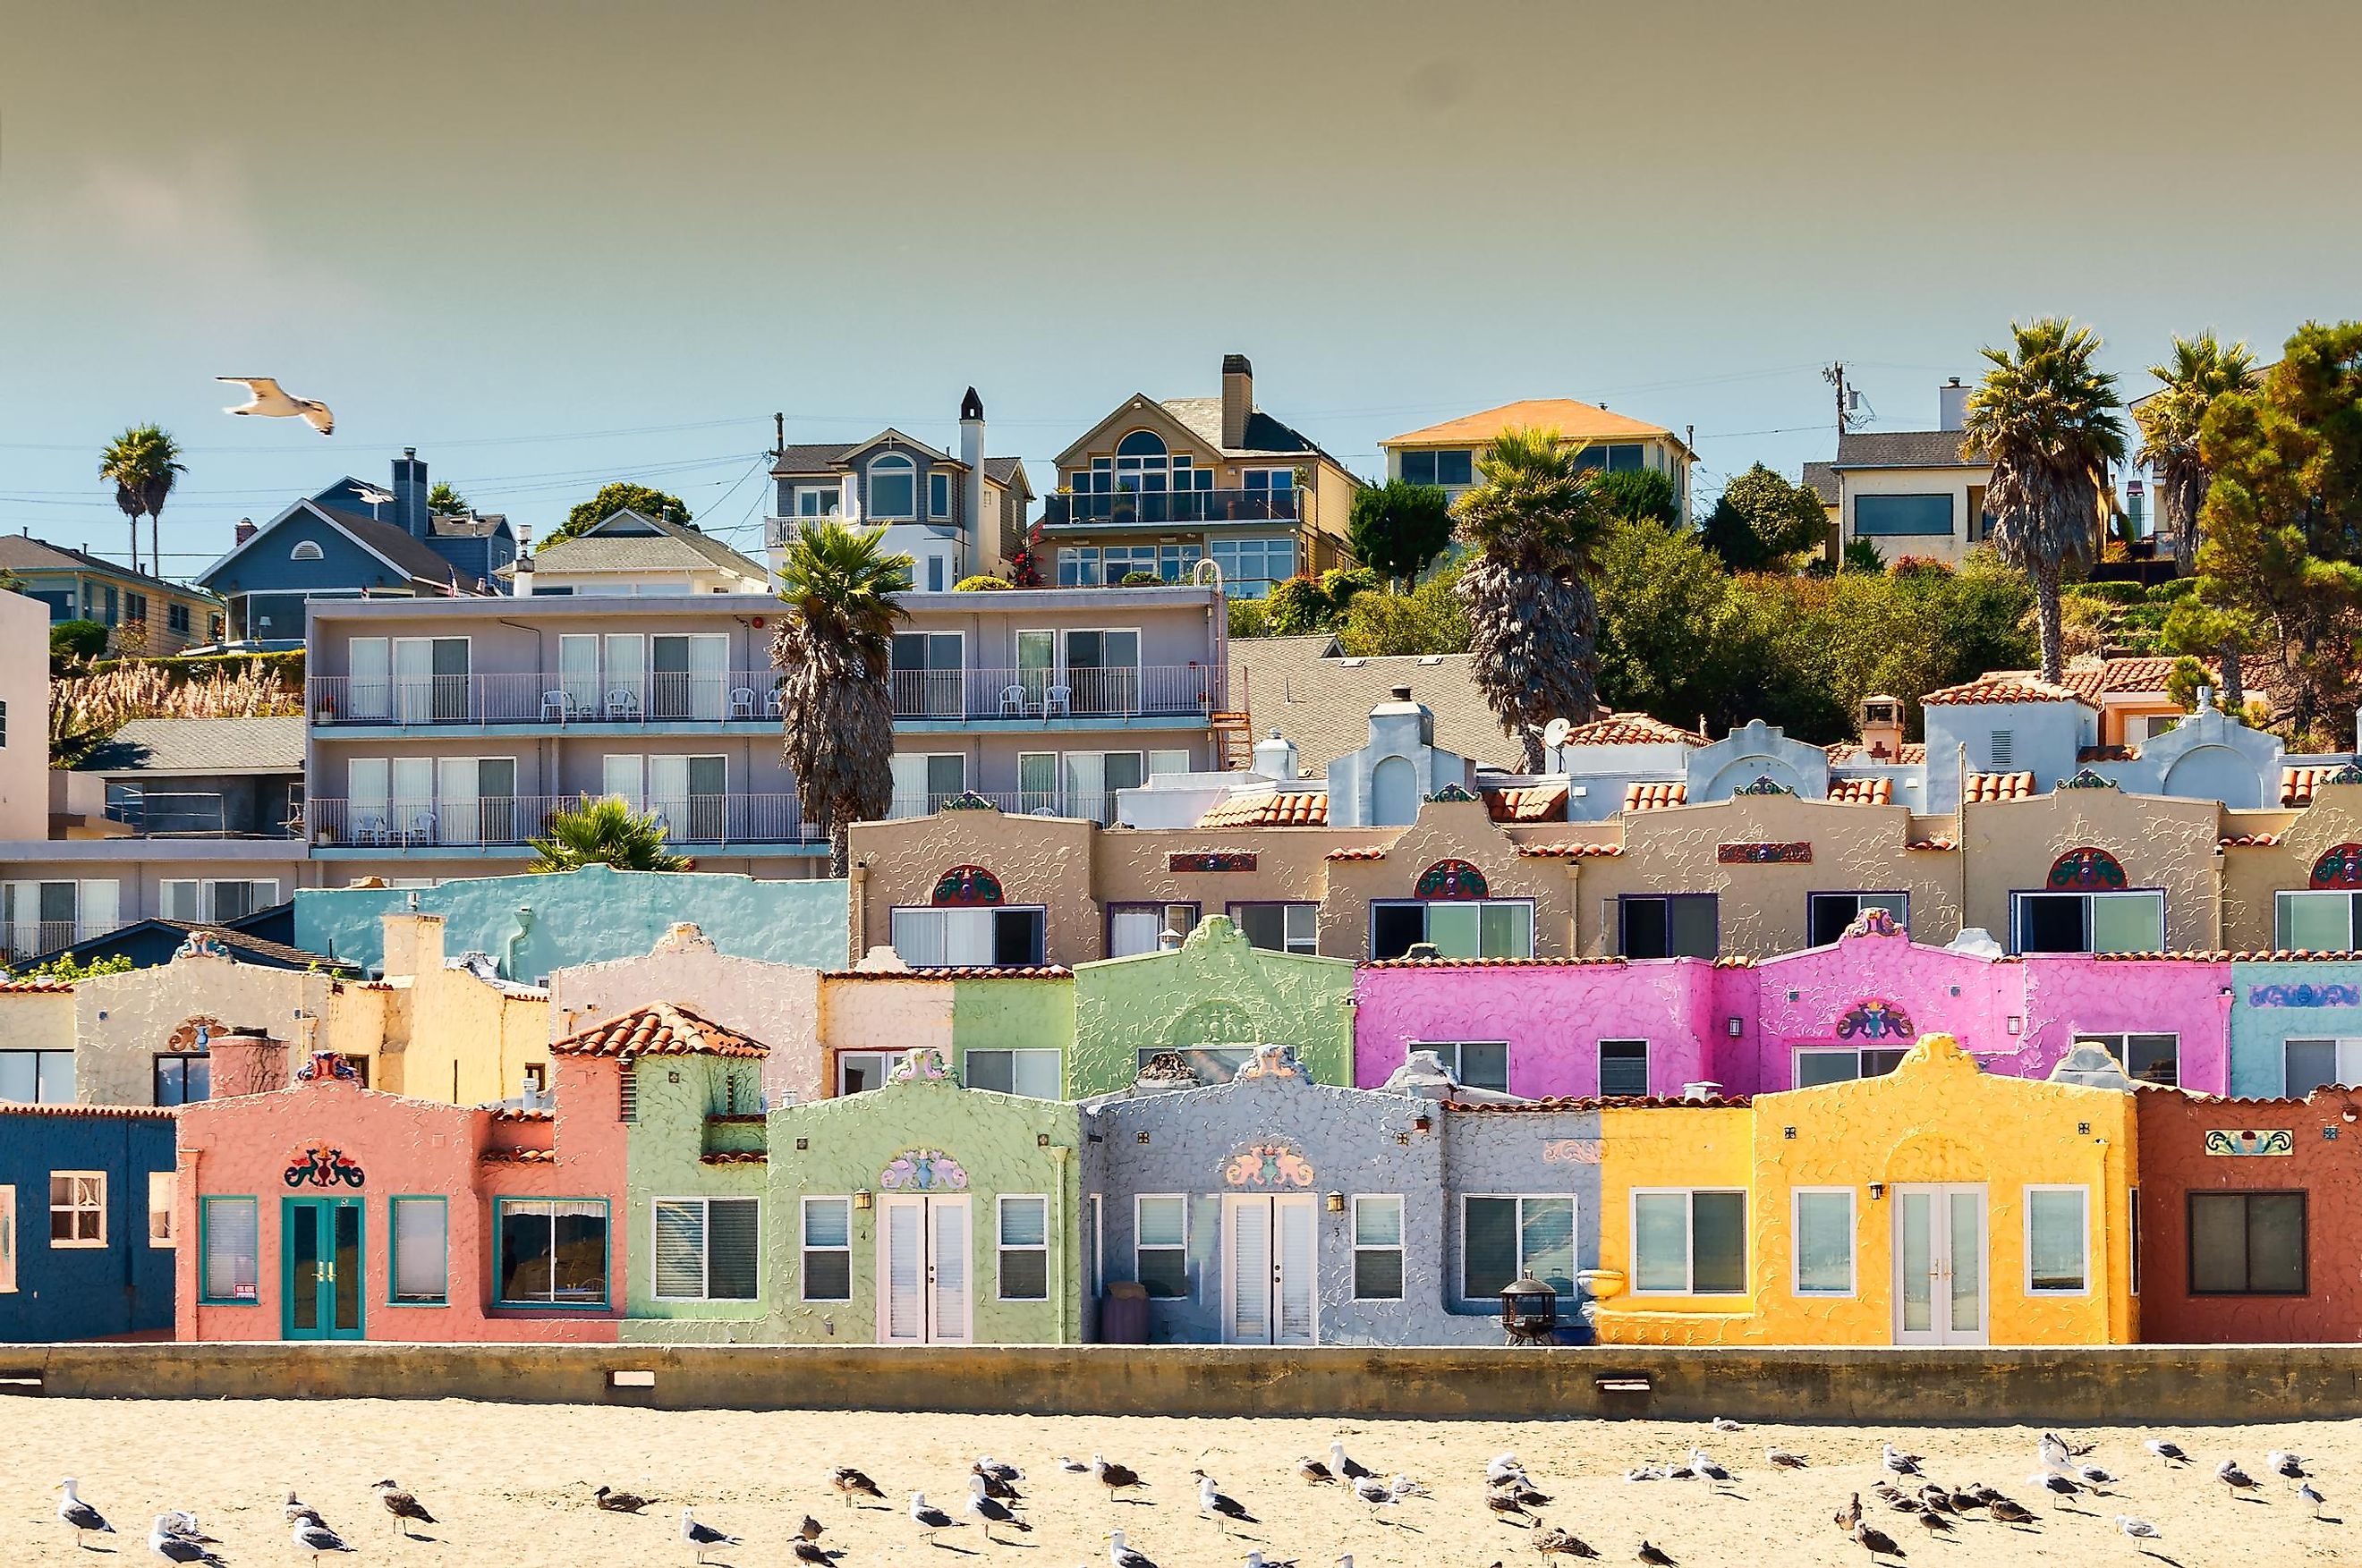 Colorful residential development in Capitola, California